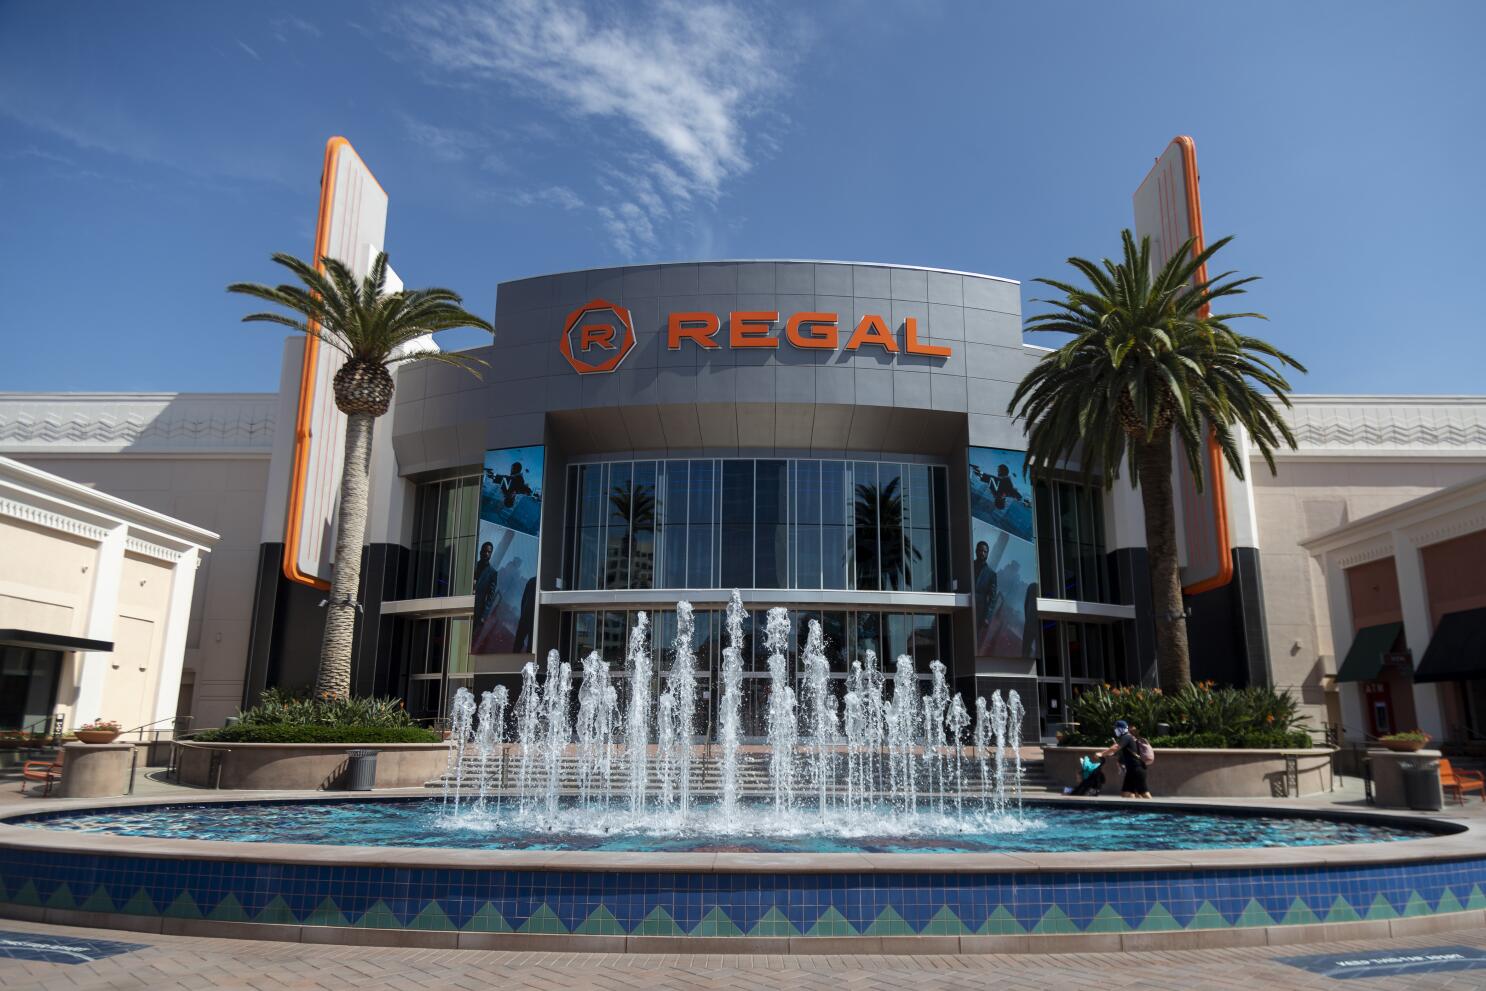 Movie theaters 'at a crisis point' as Regal shuts down - Los Angeles Times